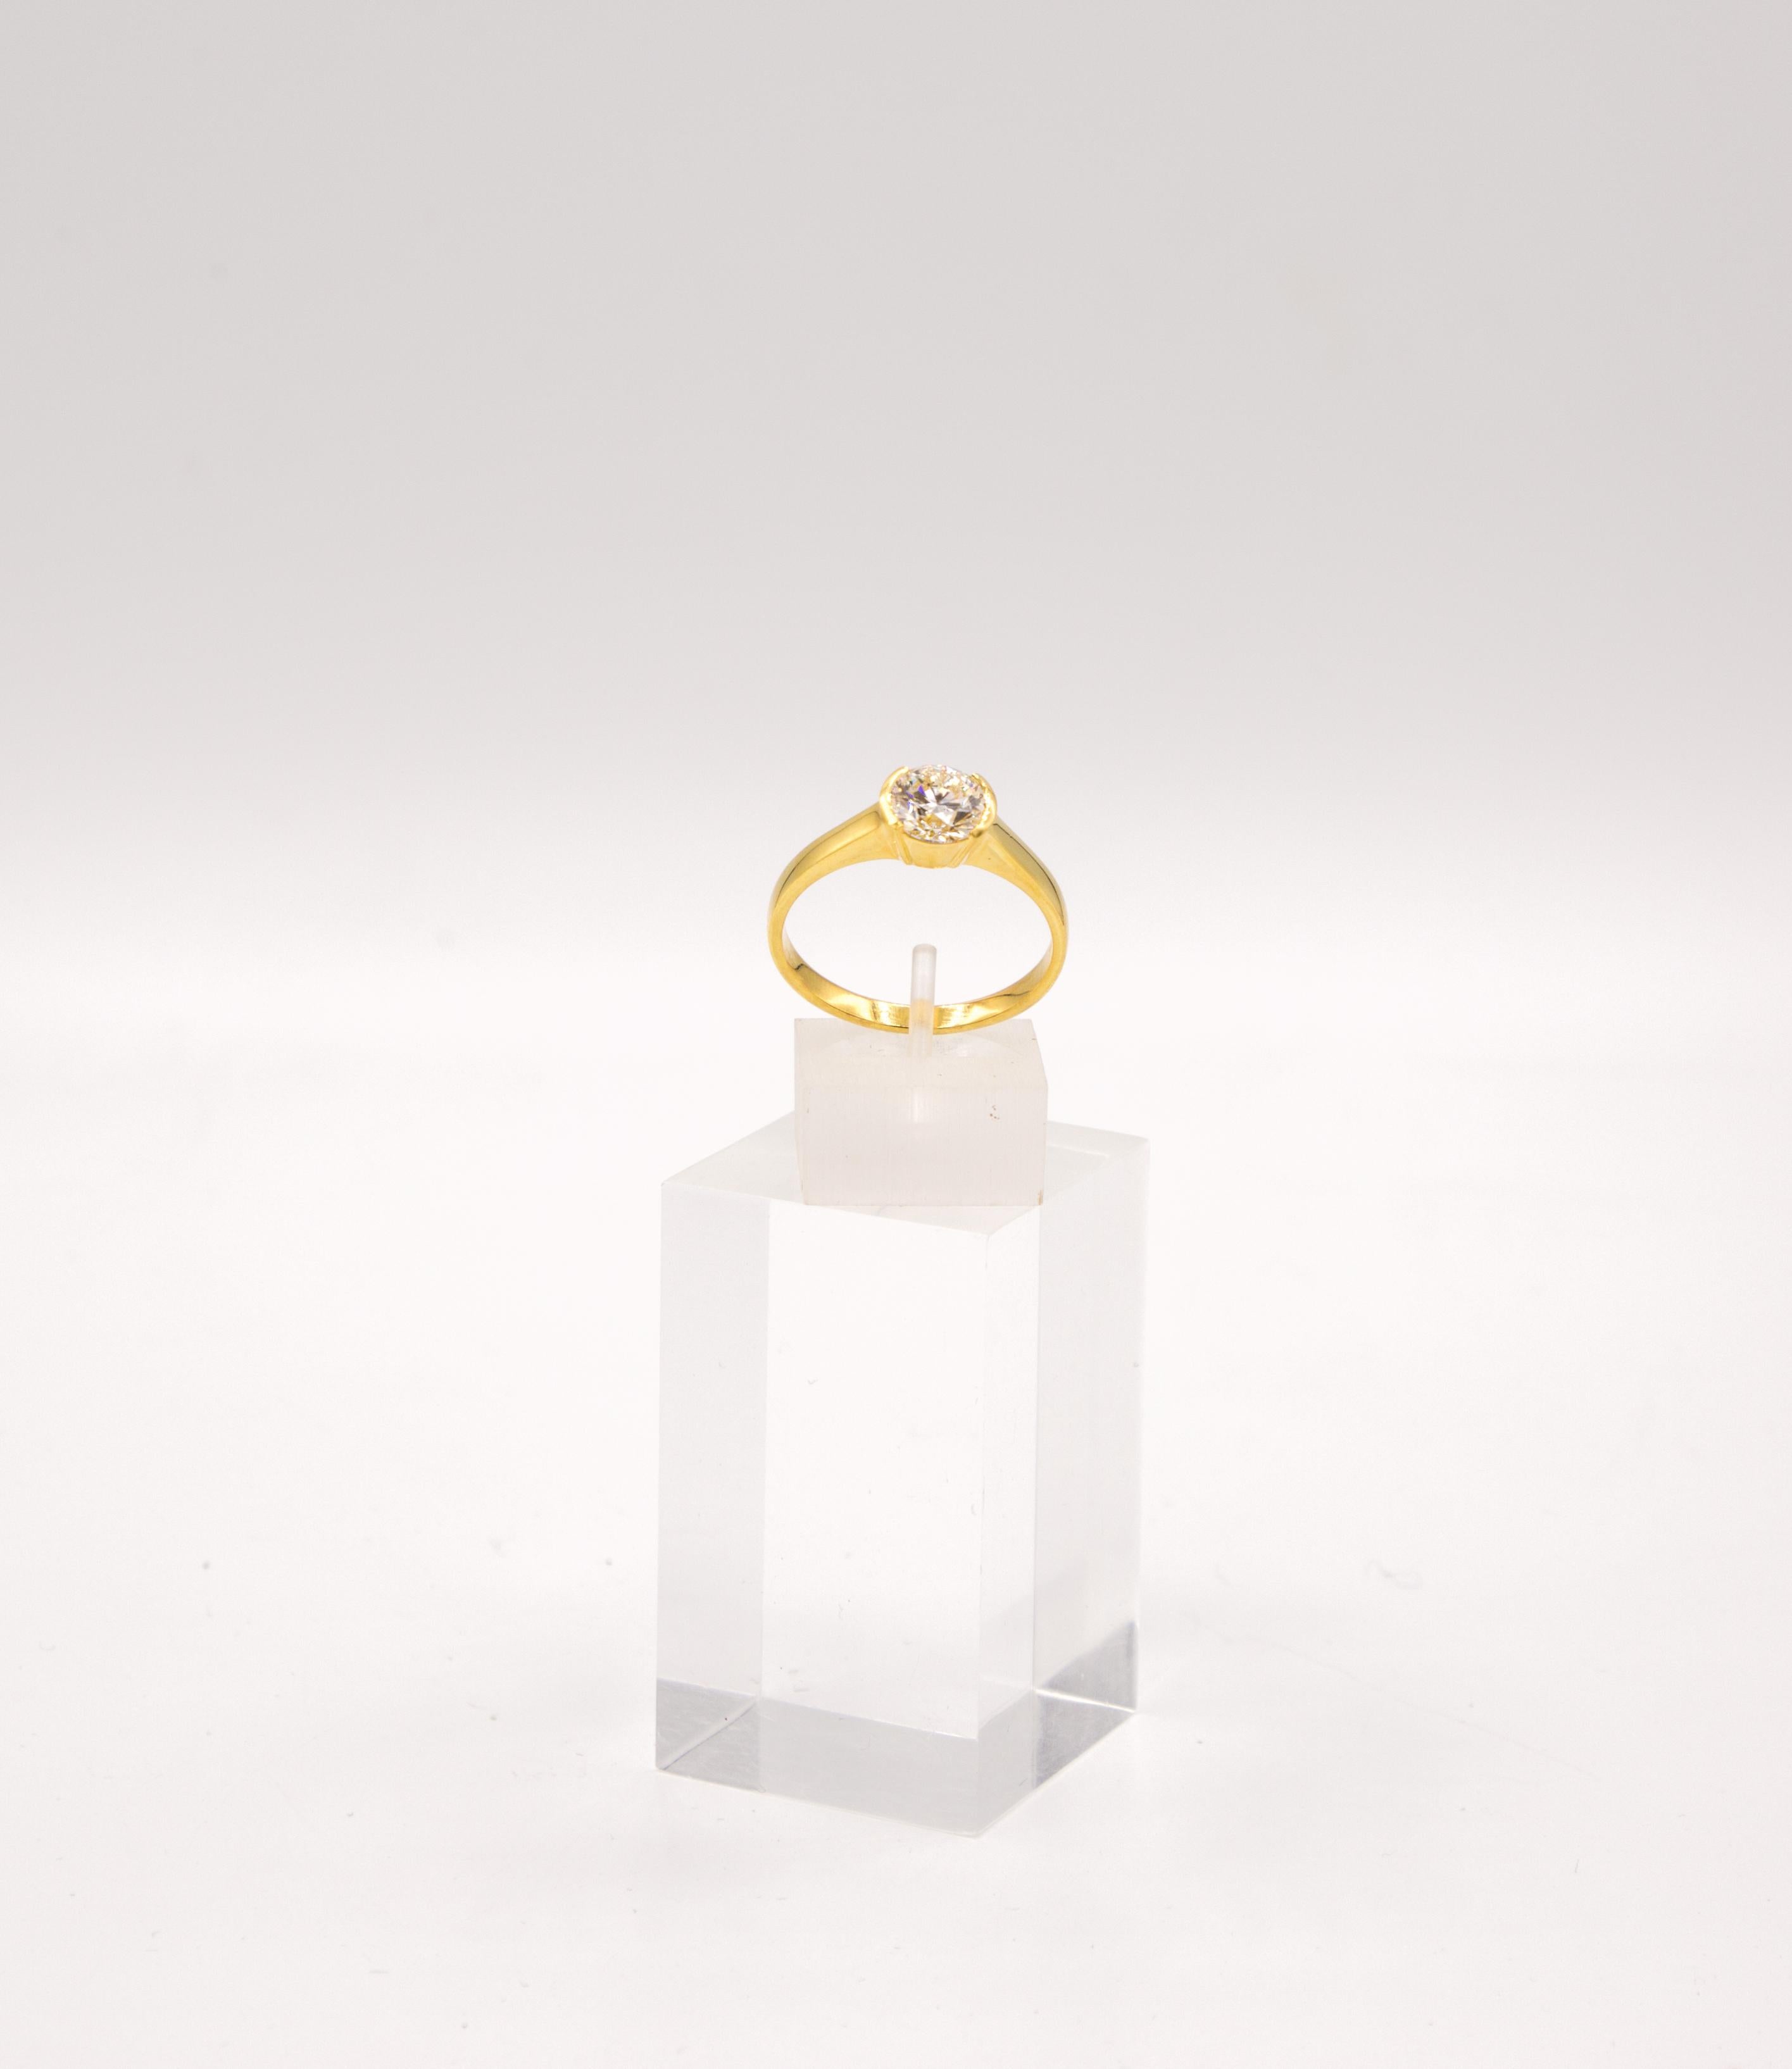 18 k yellow gold
2,01 ct Diamond brillant cut I/si1
weight 6,92 gram
size 69

This is an excellent 2 ct diamond ring for women or man
we can change the size 

